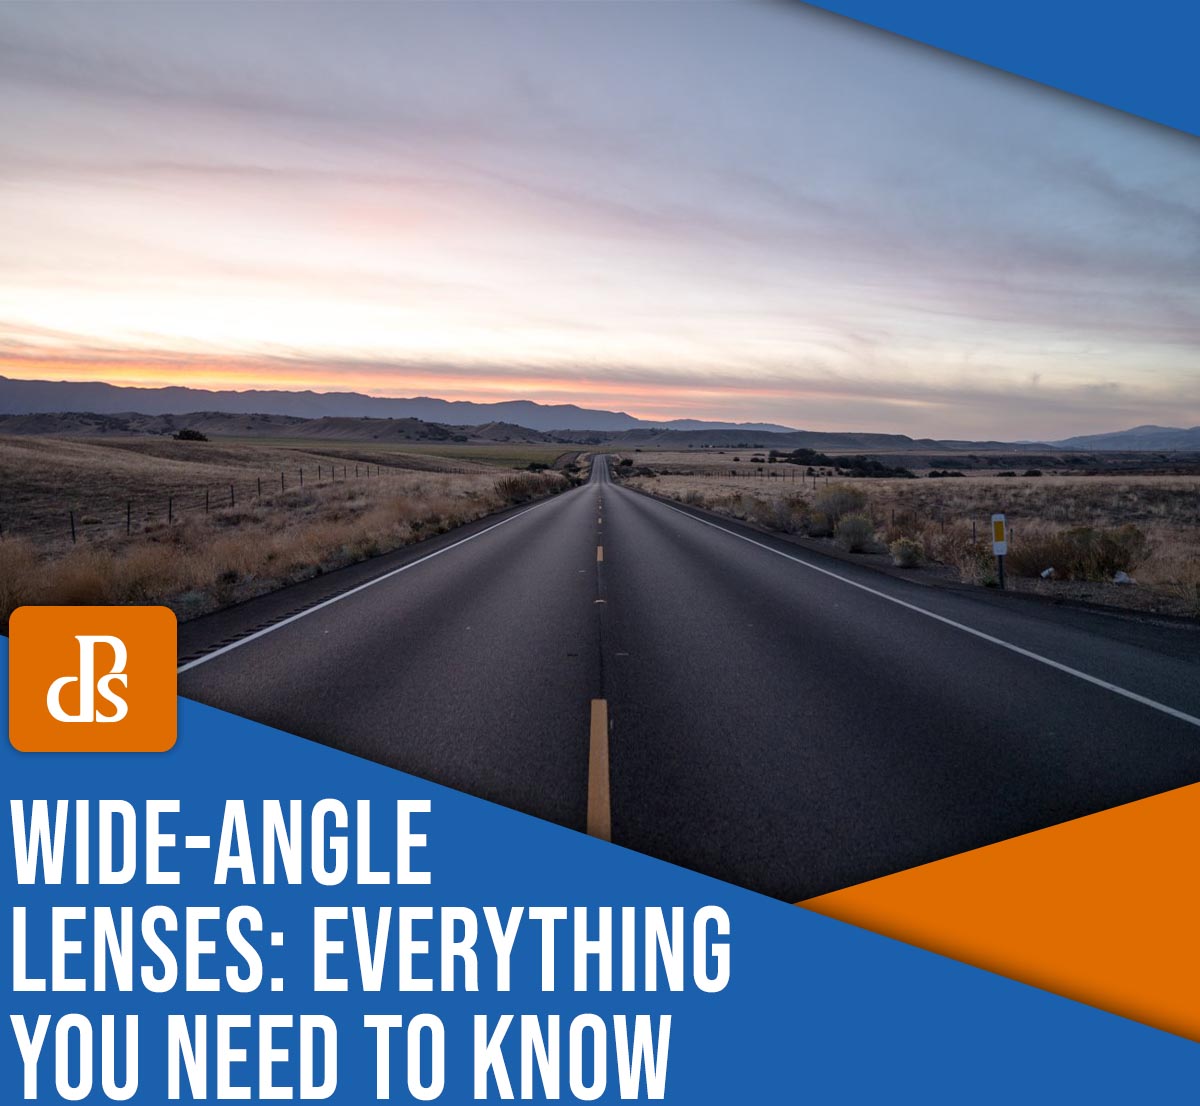 wide-angle lenses: everything you need to know